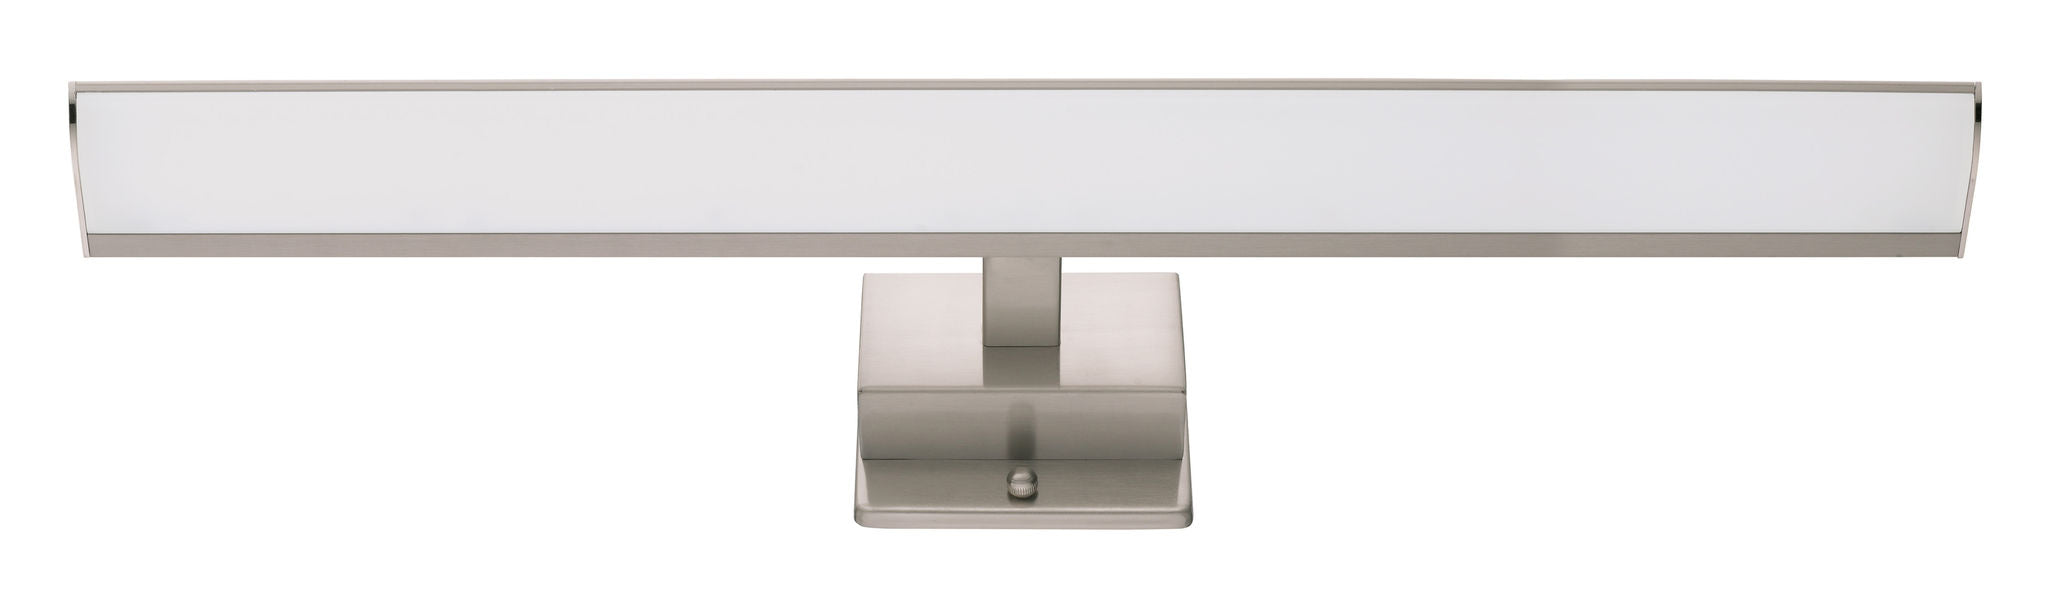 Tabiano Sconce Stainless steel INTEGRATED LED - 94615A | EGLO